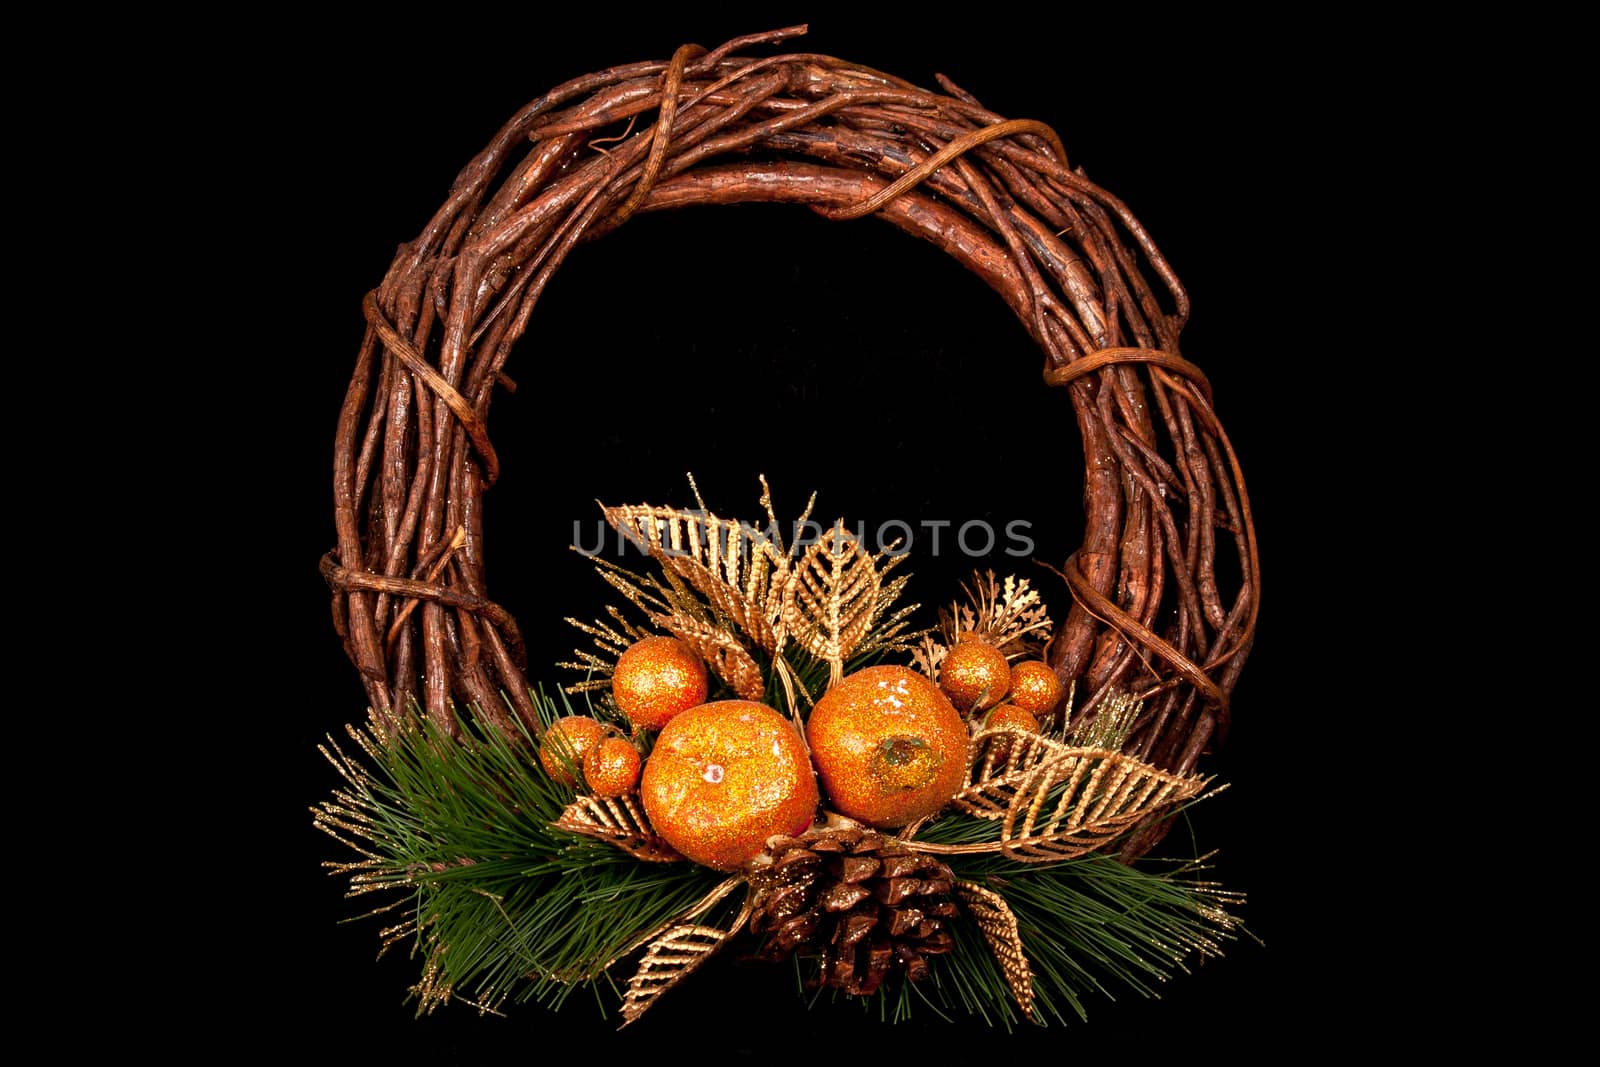 Round shaped wood wicker with a base from natural pine leafs and some shining fruits gilded in golden polish